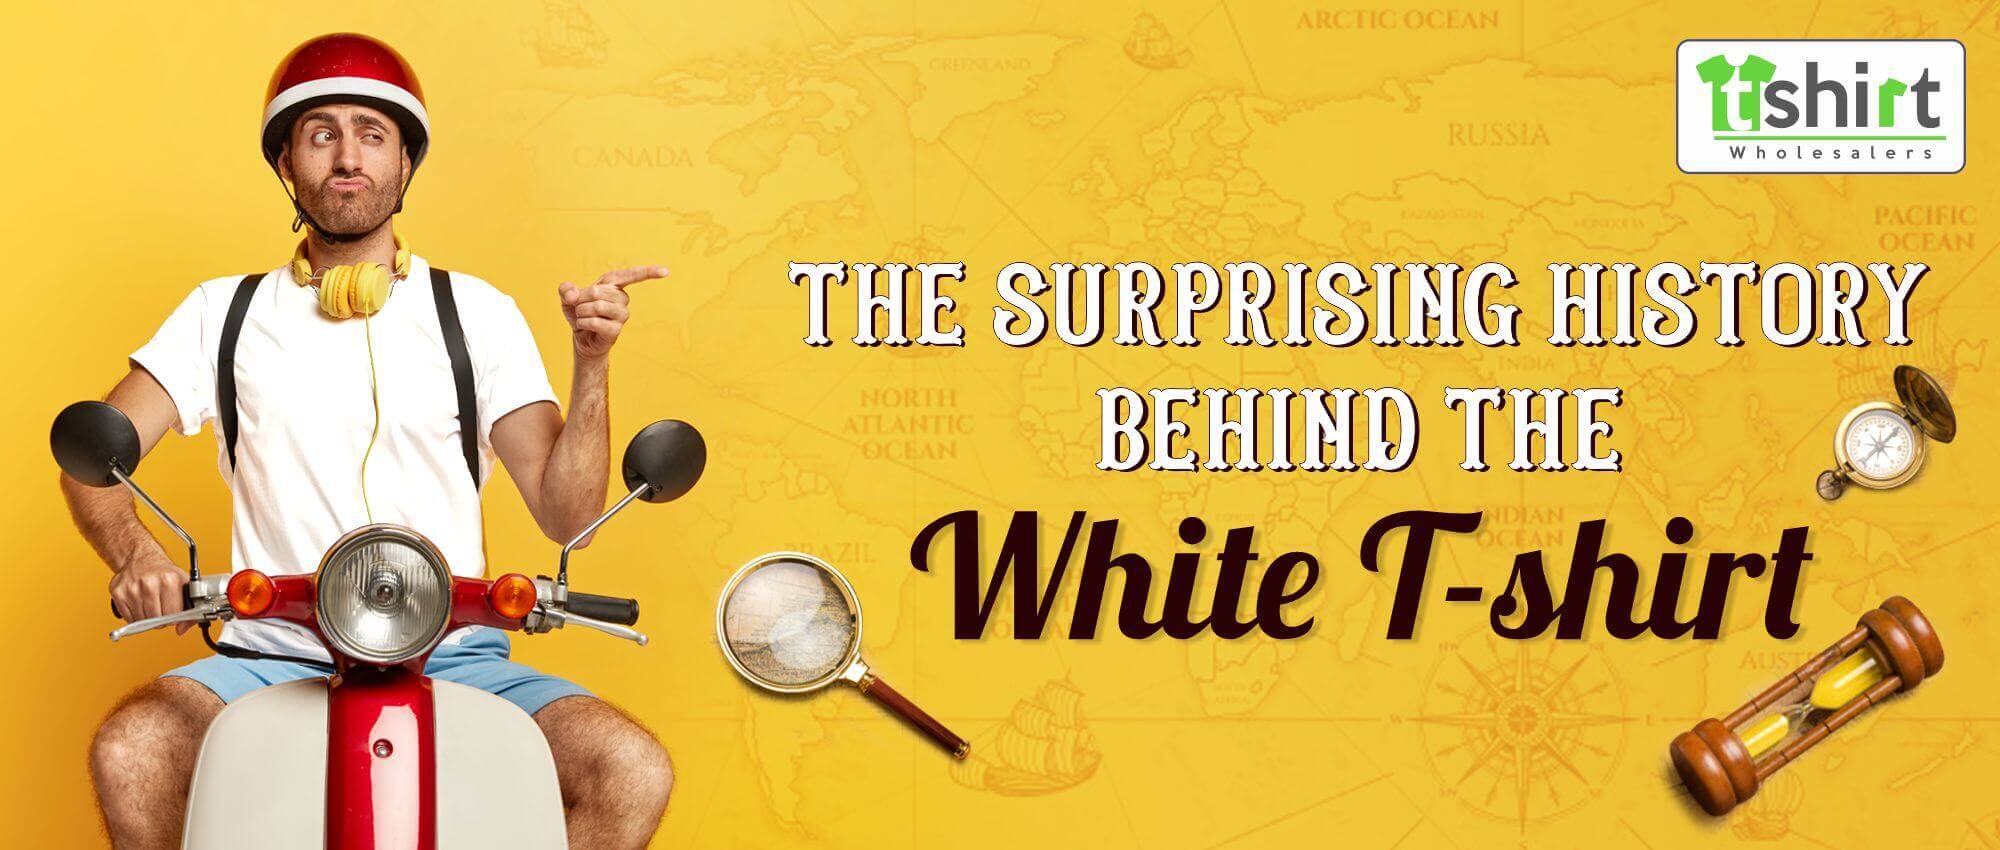 THE SURPRISING HISTORY BEHIND THE WHITE T-SHIRT